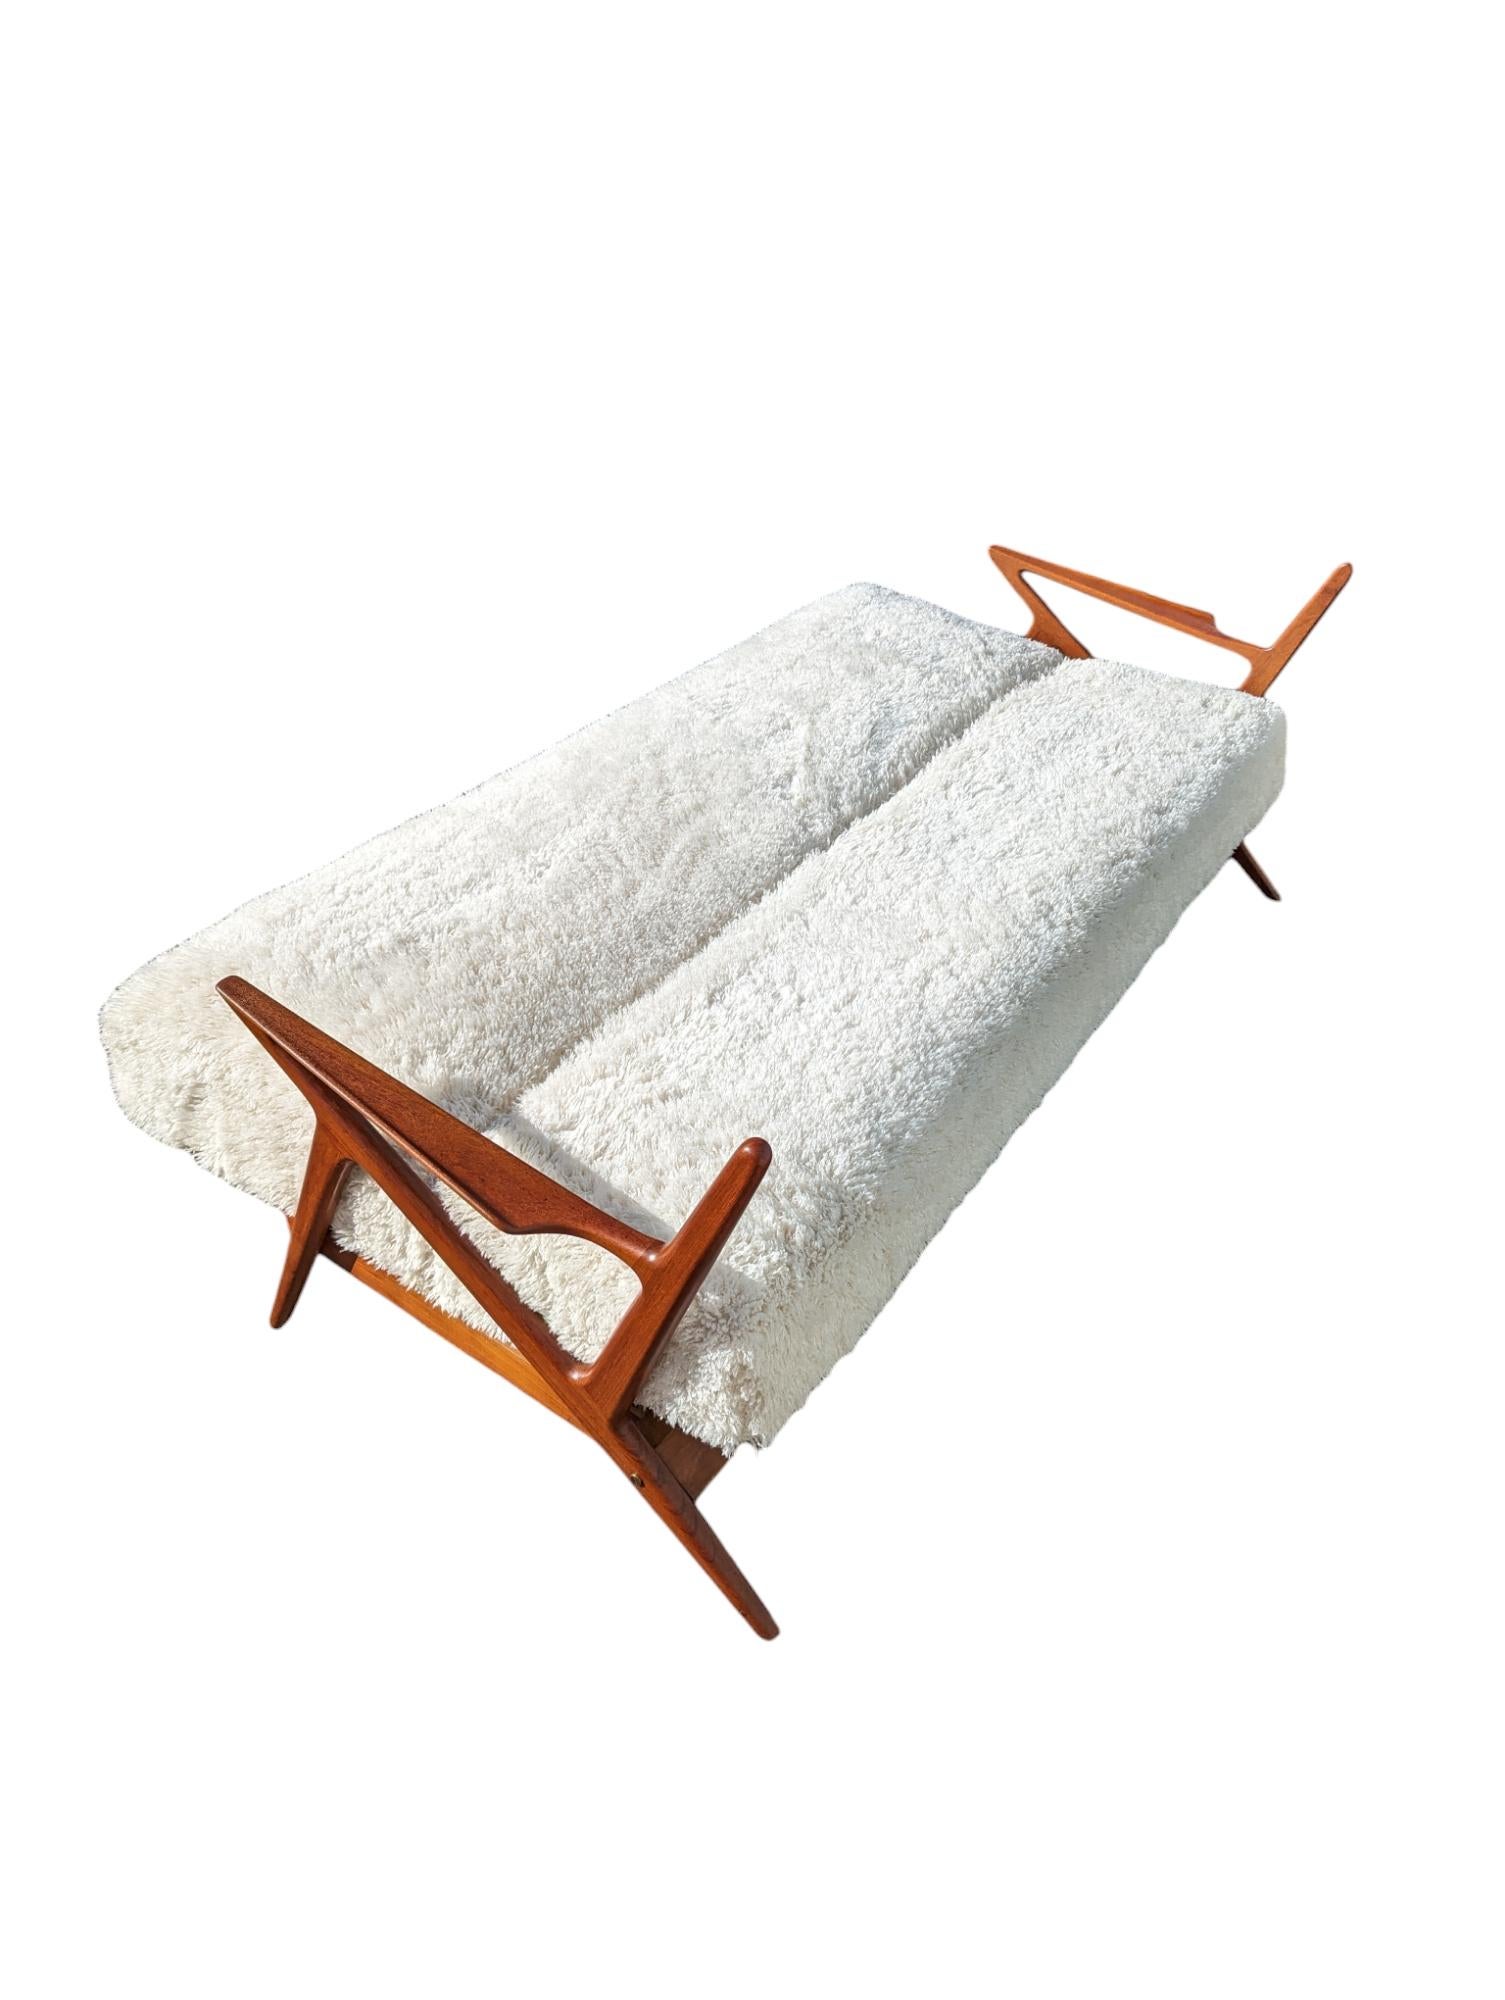 Product Description Full:
Daybed/ 3-seater ‘Model Z’ designed by Poul Jensen and produced by Selig in Denmark in 1957 newly upholstered in faux fur. This lovely 3 seater couch also doubles up as a daybed with a folding frame with the infamous